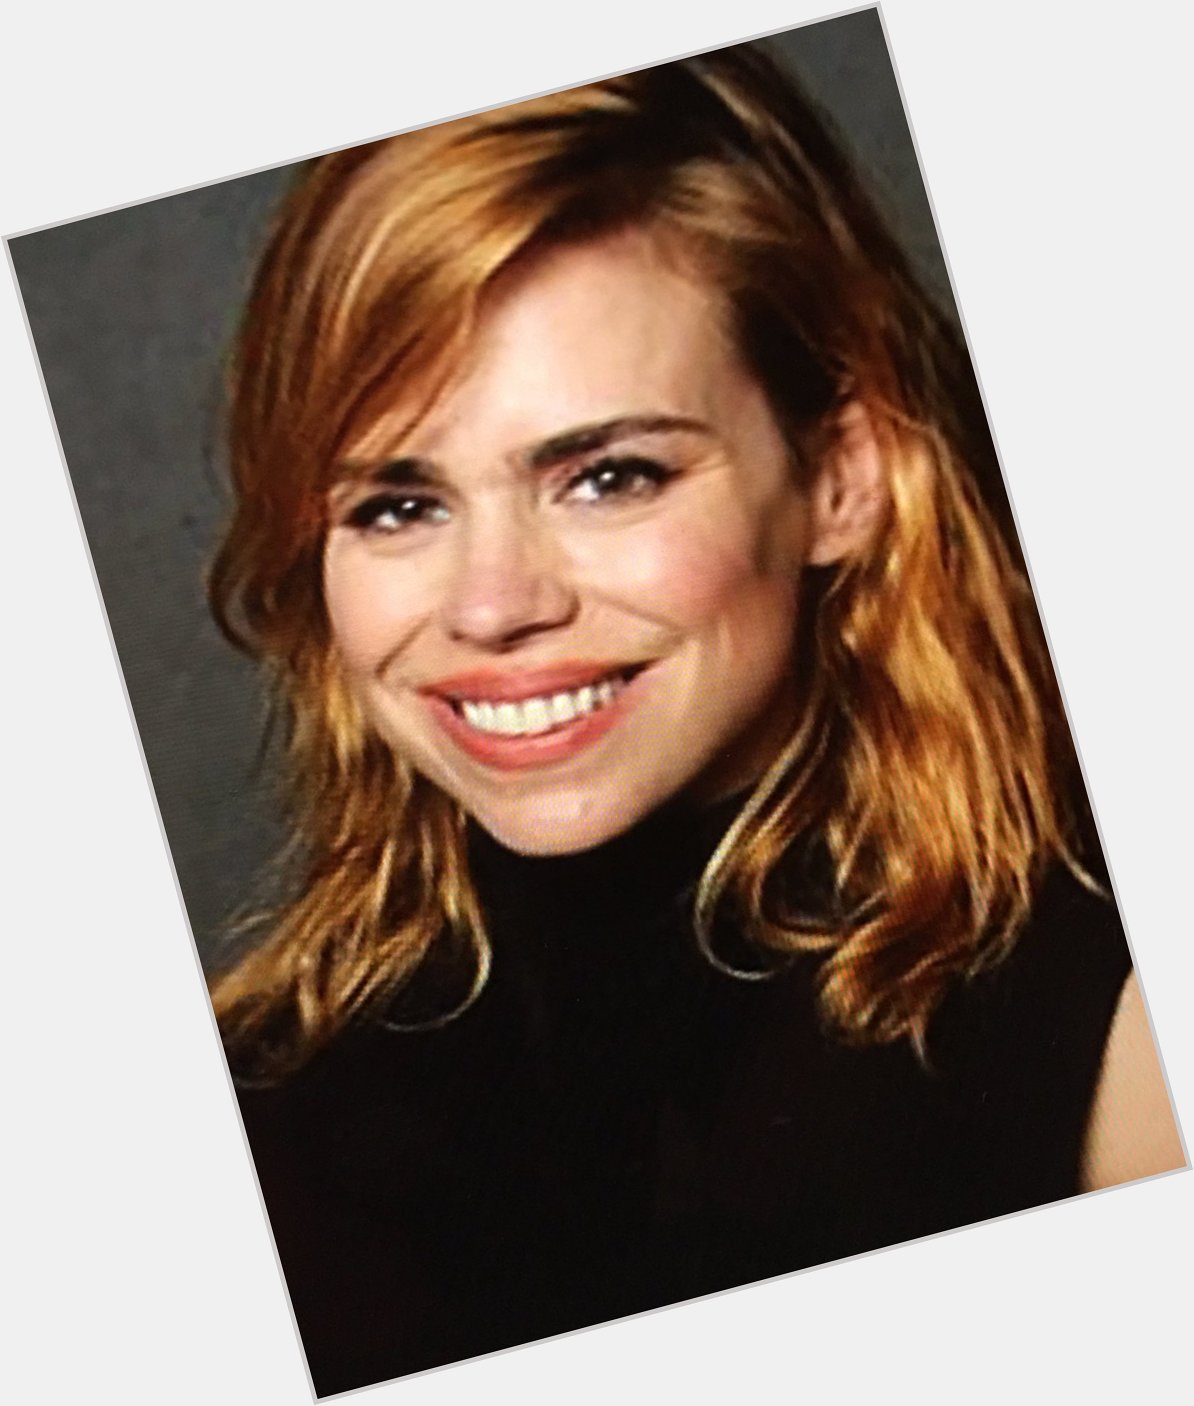 On behalf of myself and everyone on message a happy 40th birthday today to former Doctor Who star Billie Piper 